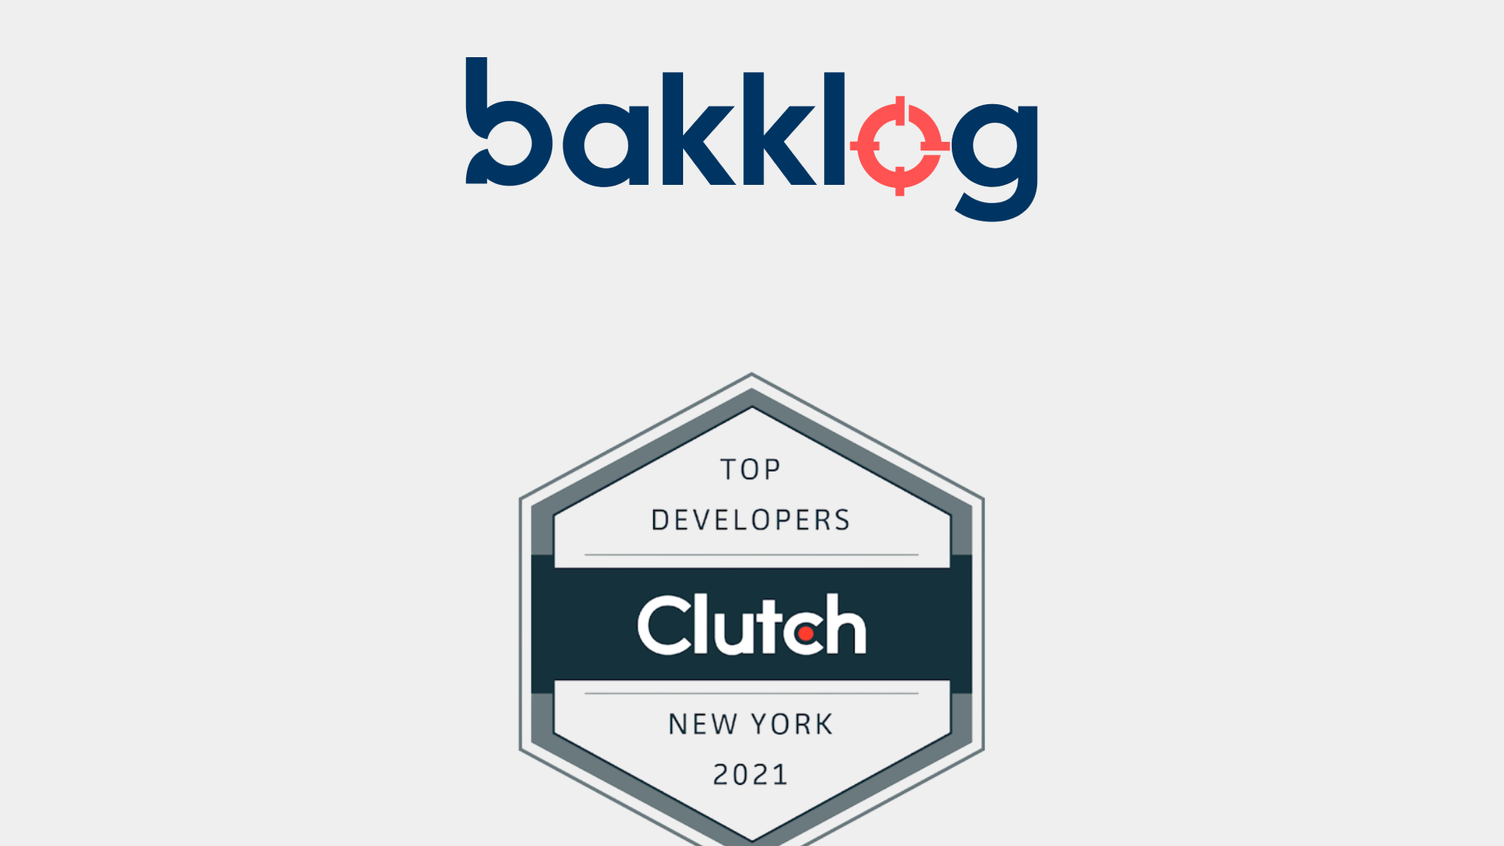 Clutch Names Bakklog as One of the Top Software Developers in New York 2021